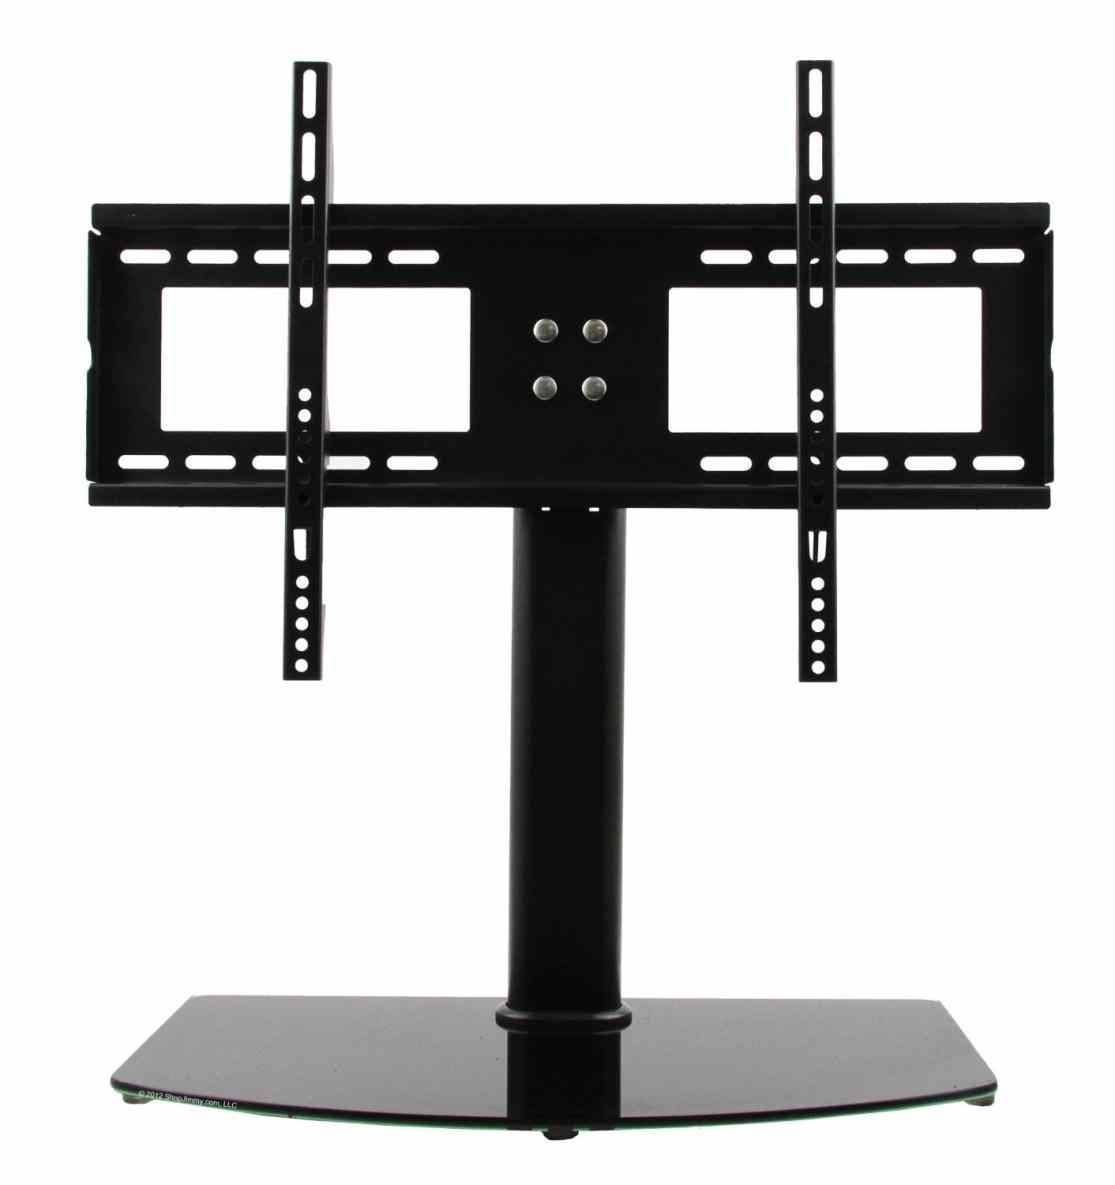 32 Inch Emerson Led Tv | Wnsdha In Emerson Tv Stands (View 11 of 15)